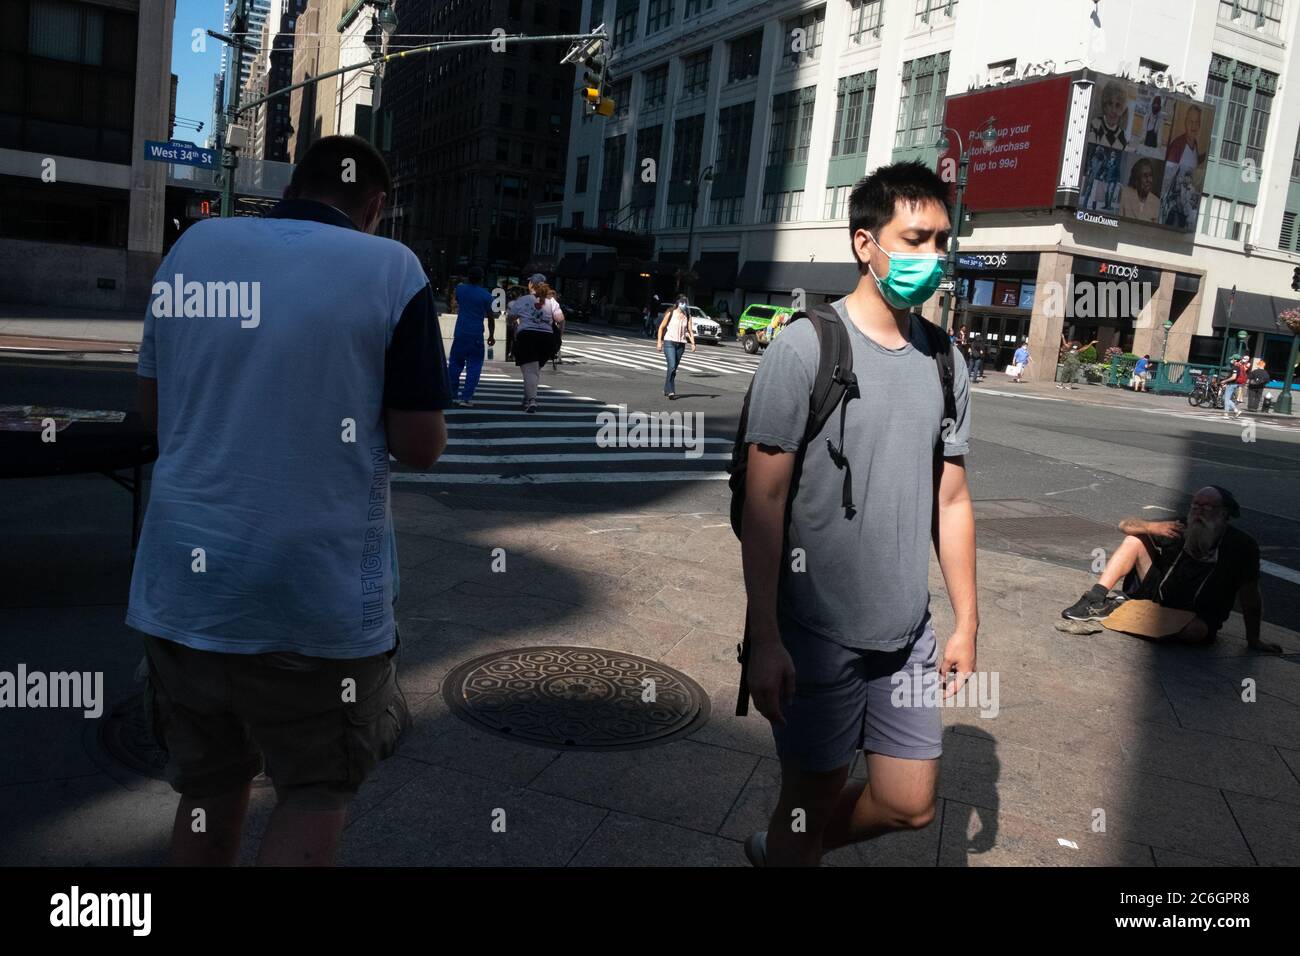 New York, United States. 08th July, 2020. A man wearing a face mask walking through midtown in Manhattan as the city enters phase 3 of reopening amid the coronavirus pandemic.As New York City enters phase 3 of reopening retail stores for indoor shopping, restaurants have been postponed for indoor dinning. Meanwhile Black Lives Matter protests continue in the city as the Mayor along with a group of people painted a large Black Lives Matter mural in front of Trump Tower on 5th Ave. Credit: SOPA Images Limited/Alamy Live News Stock Photo